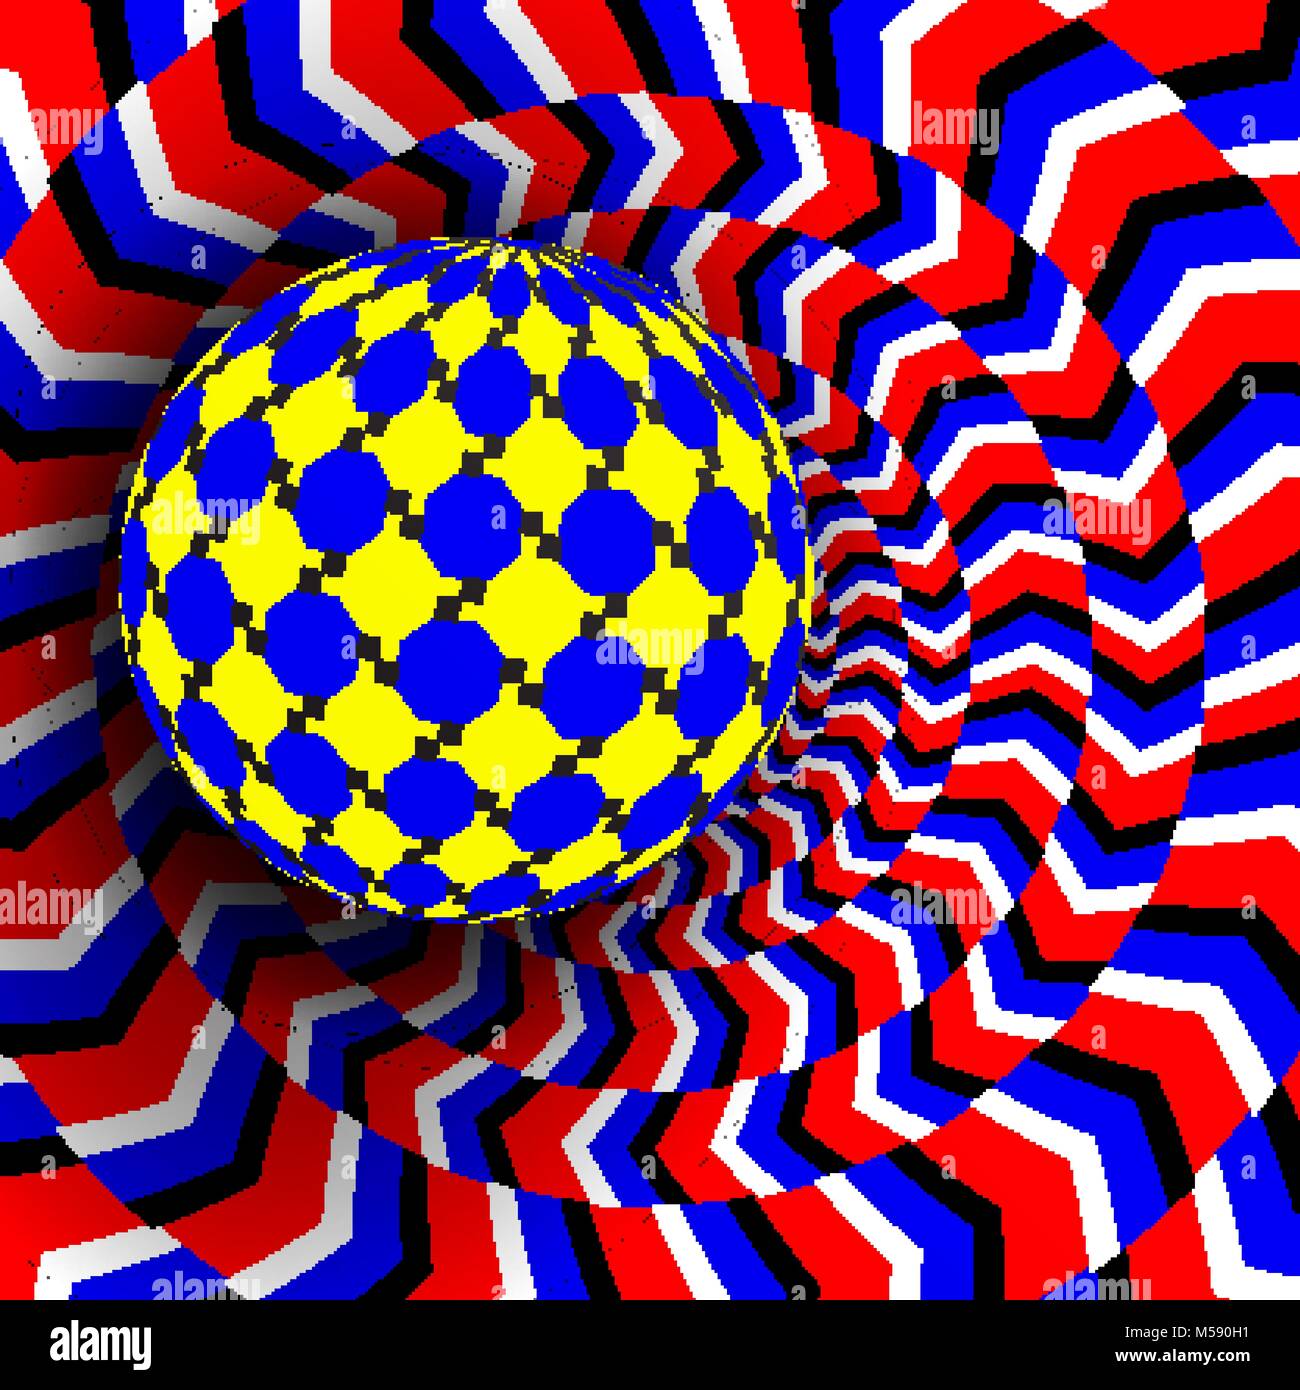 cool illusions effects